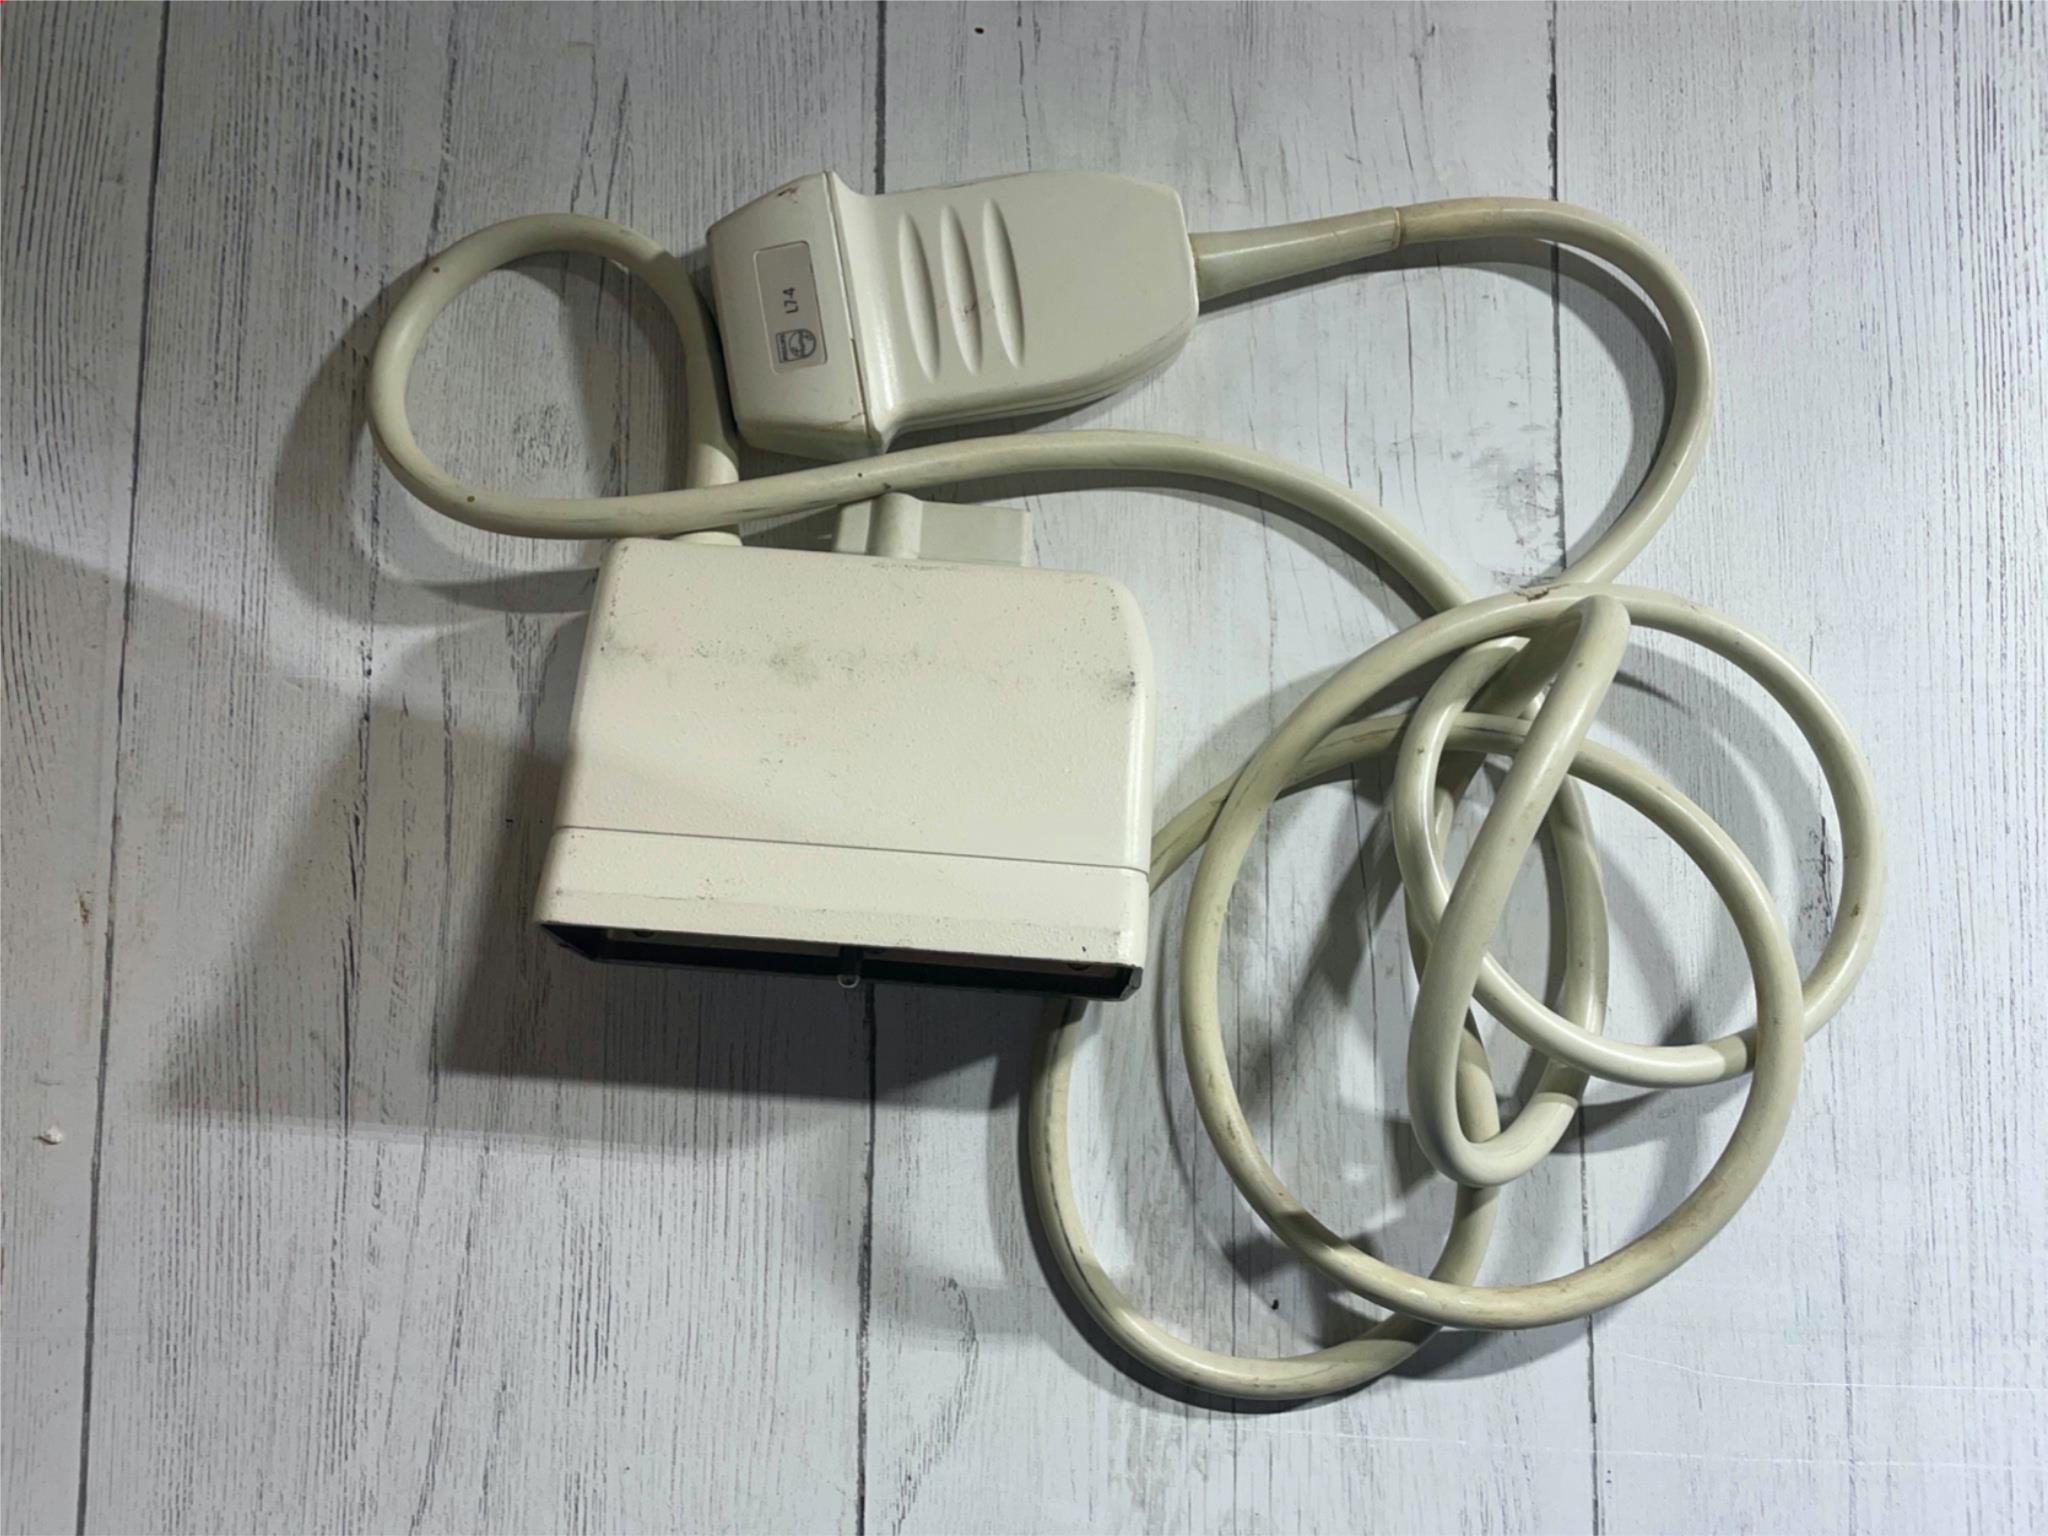 Philips L7-4 Linear Array Ultrasound Transducer Probe SN: 021R2X DIAGNOSTIC ULTRASOUND MACHINES FOR SALE